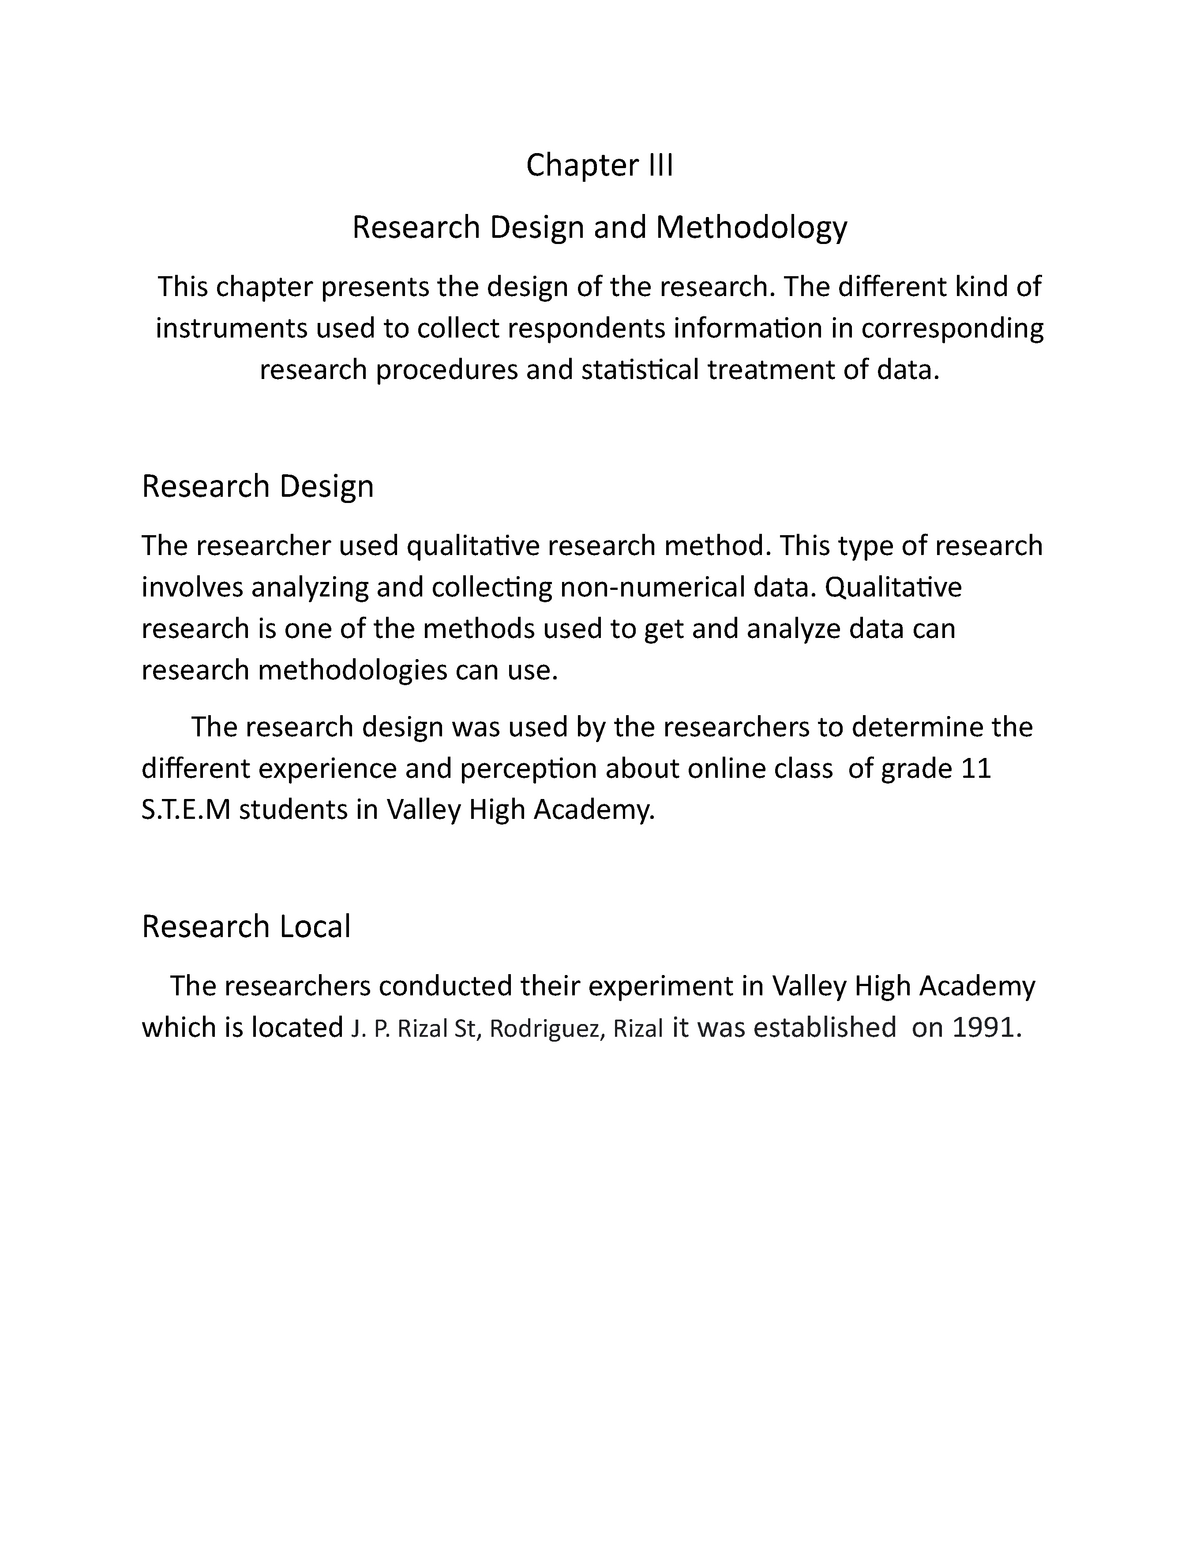 chapter research design and methodology